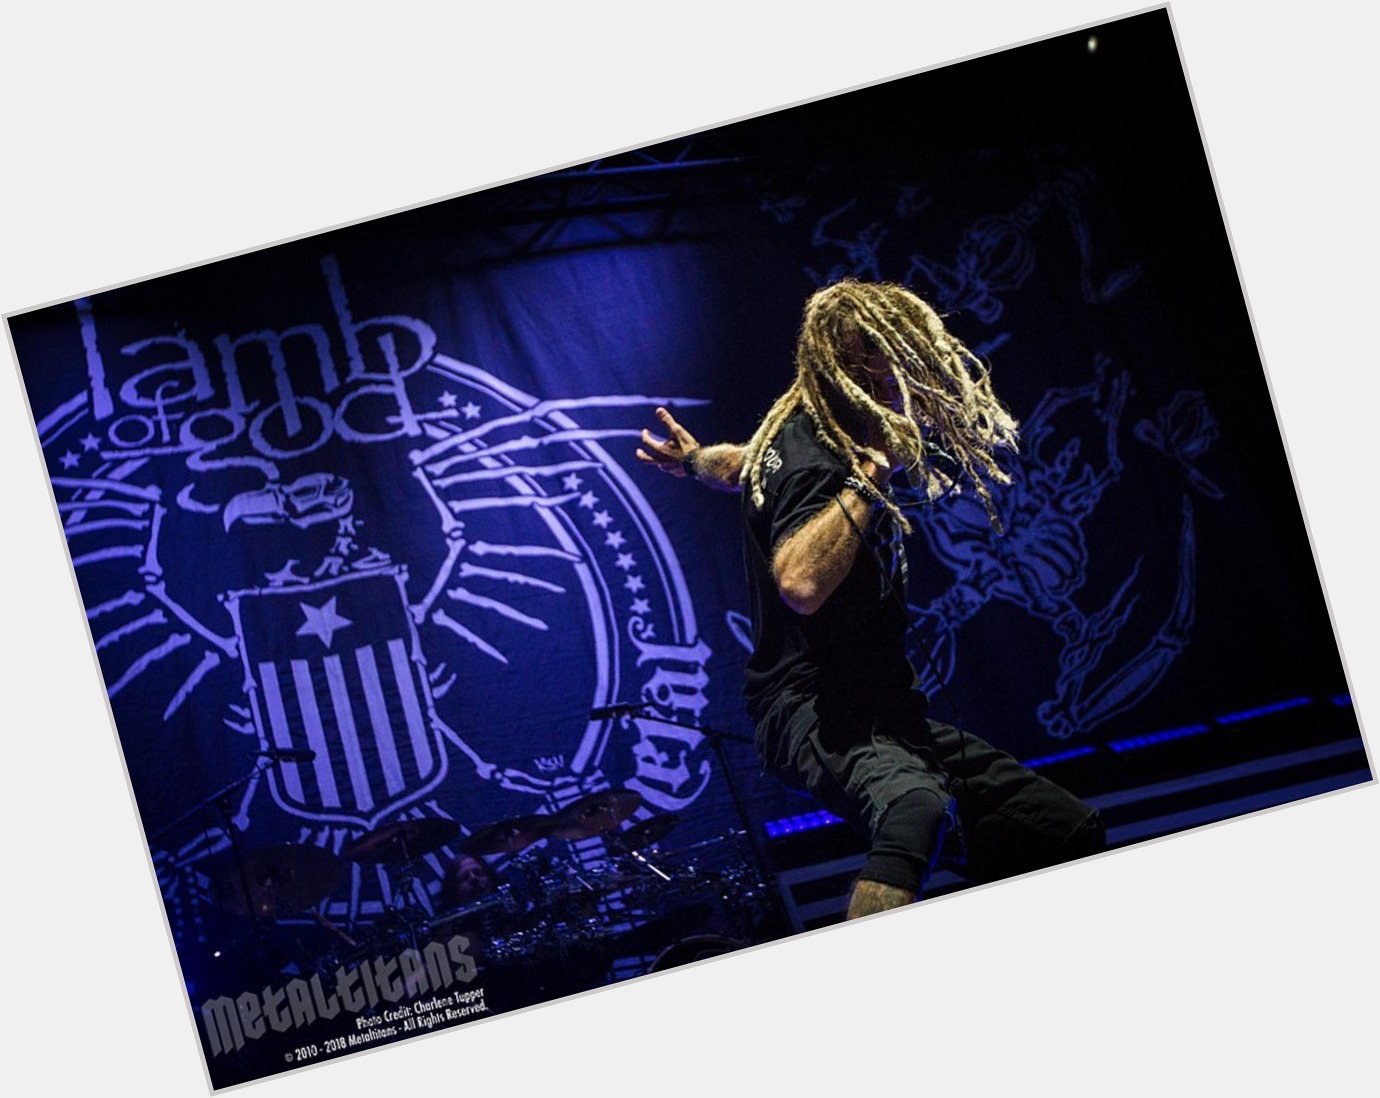 Metaltitans \"Happy Birthday\" shout out to Randy Blythe of 